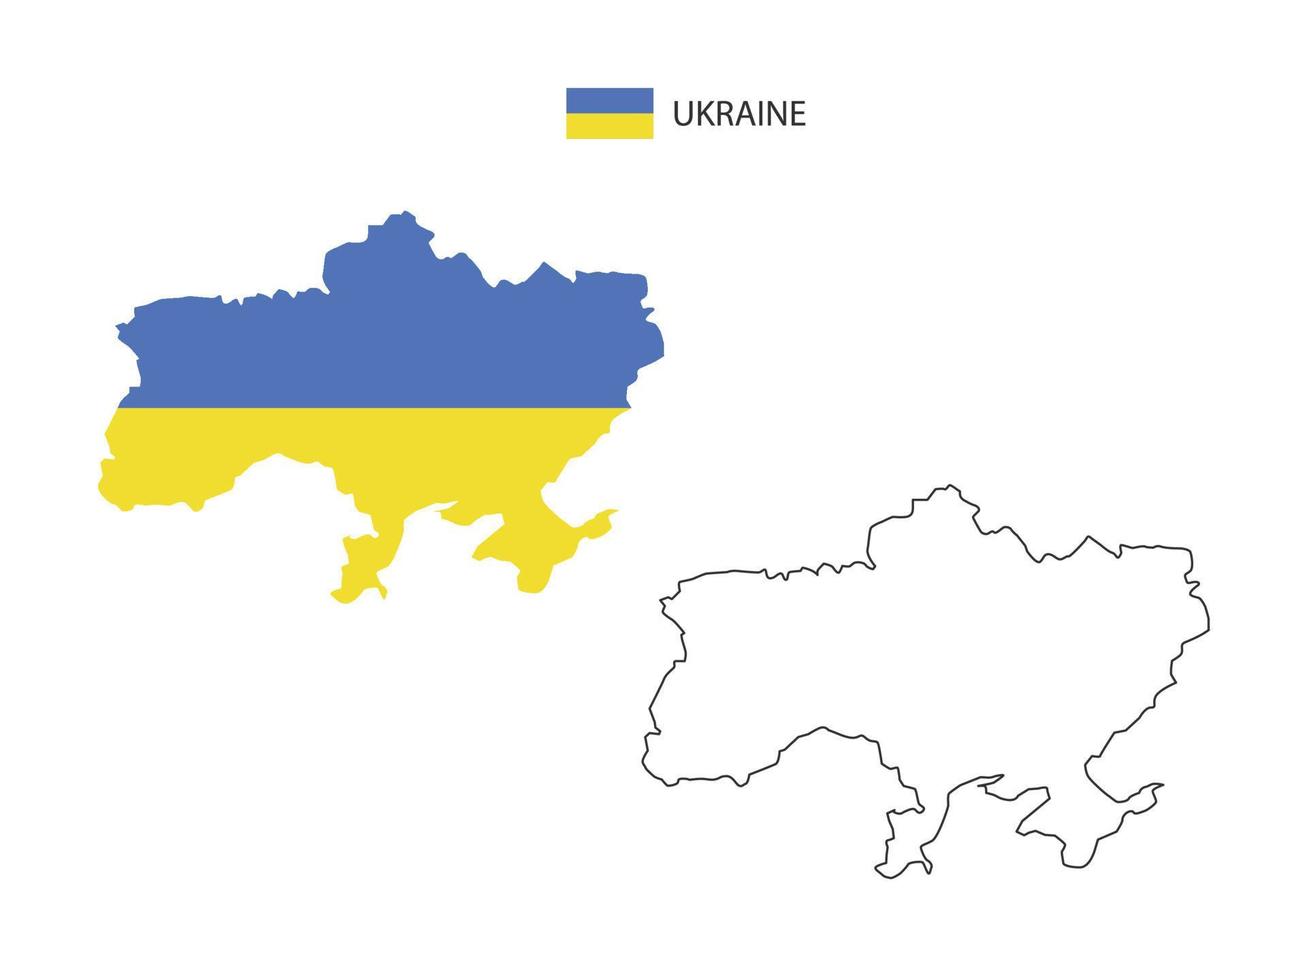 Ukraine map city vector divided by outline simplicity style. Have 2 versions, black thin line version and color of country flag version. Both map were on the white background.